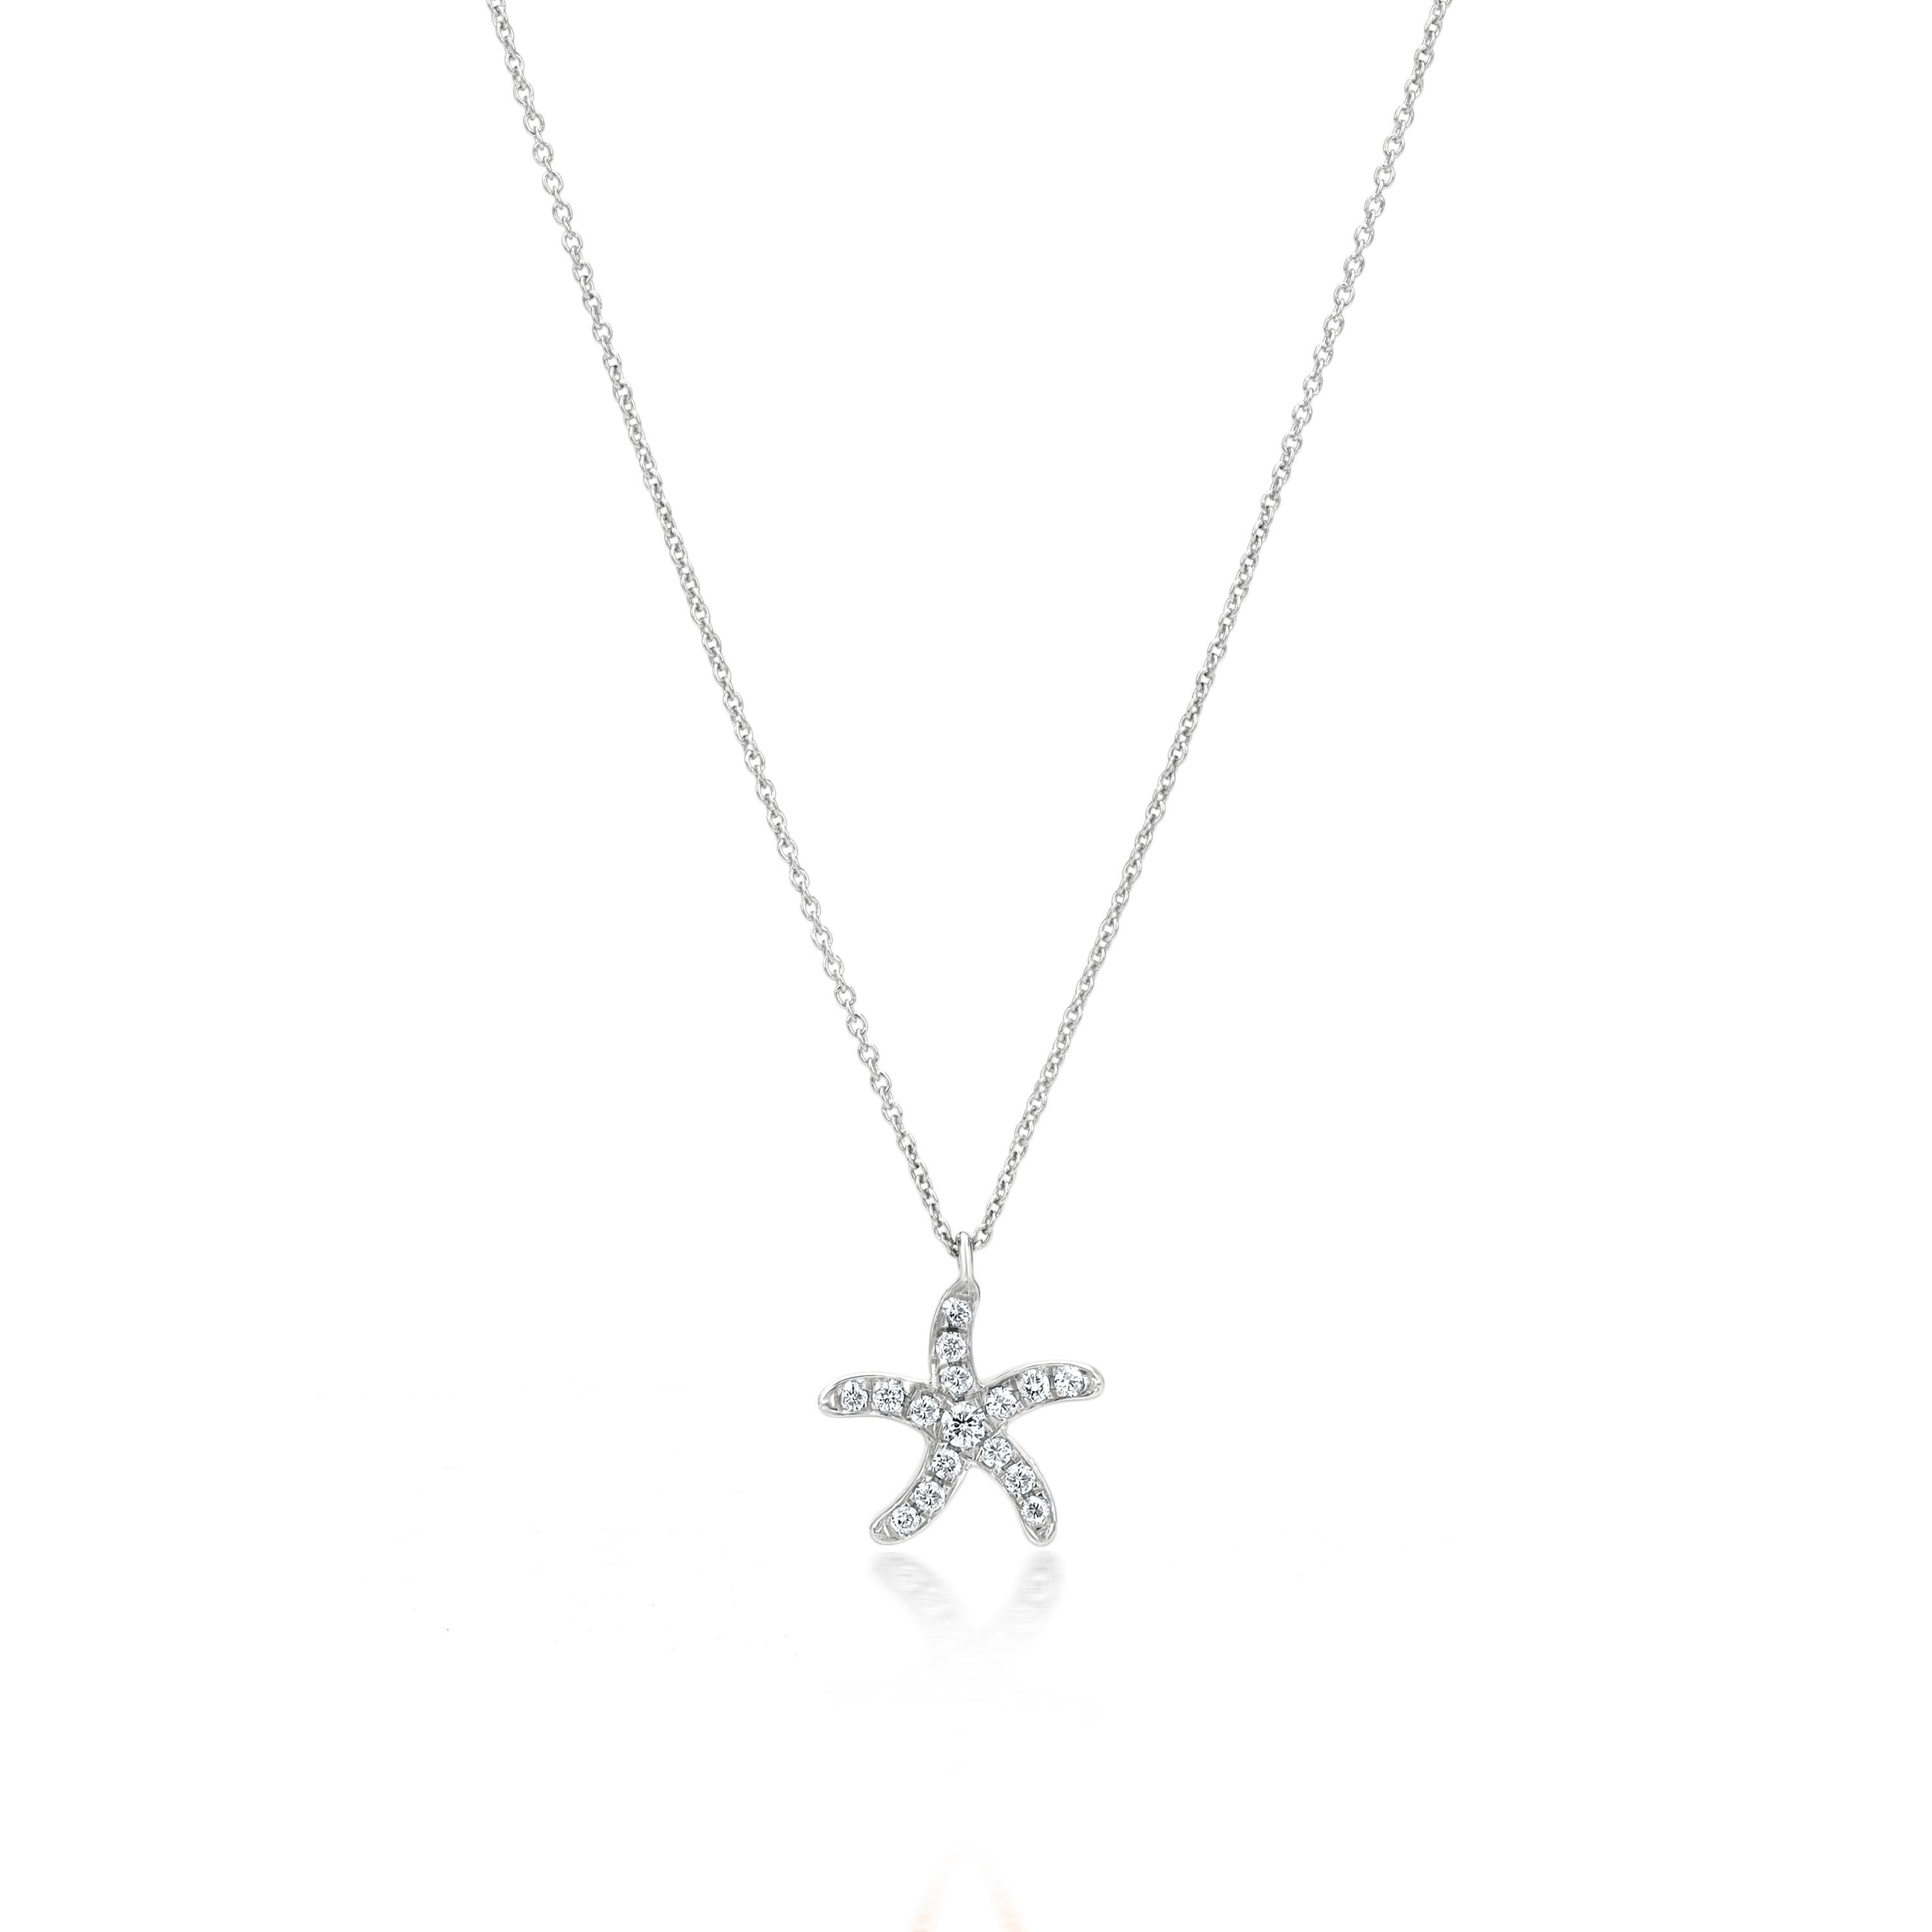 Grace your neckline with a Luxle starfish pendant which is a symbol of renewal and regeneration. Subtle yet pretty this starfish pendant necklace is the new fashion statement. This necklace is featured with a starfish pendant embellished with 16